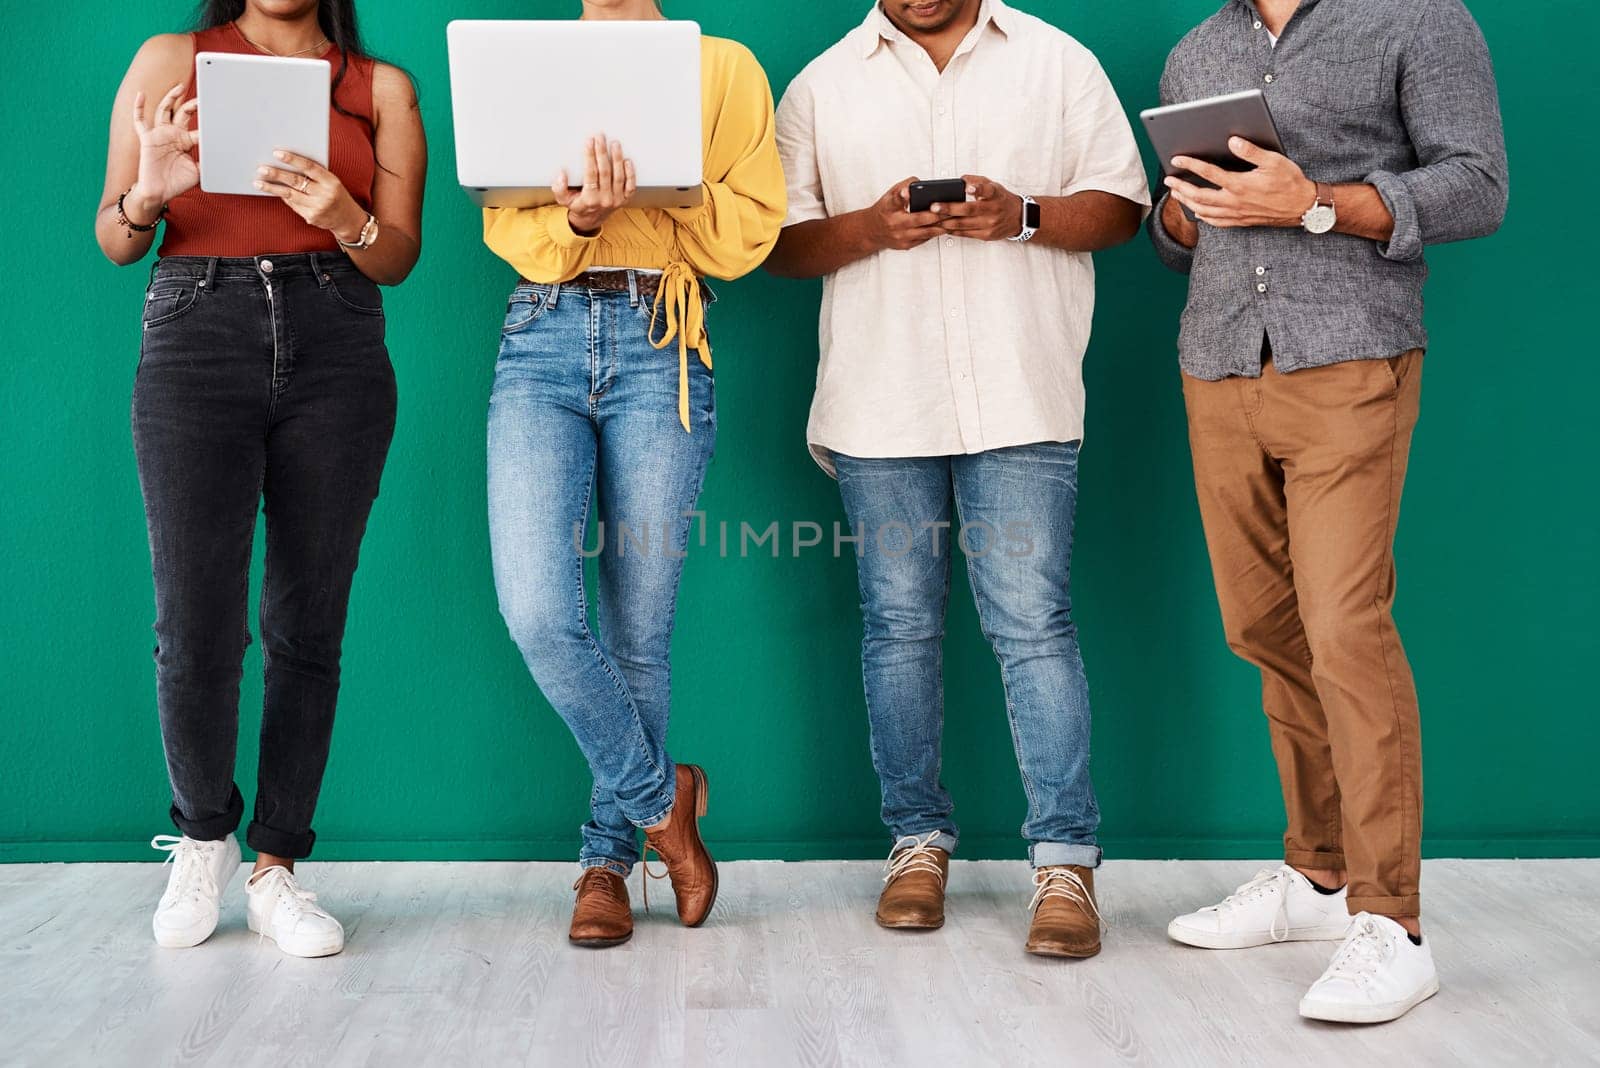 There are many ways to stay connected. Closeup shot of a group of unrecognisable designers using digital devices while standing together against a green background. by YuriArcurs